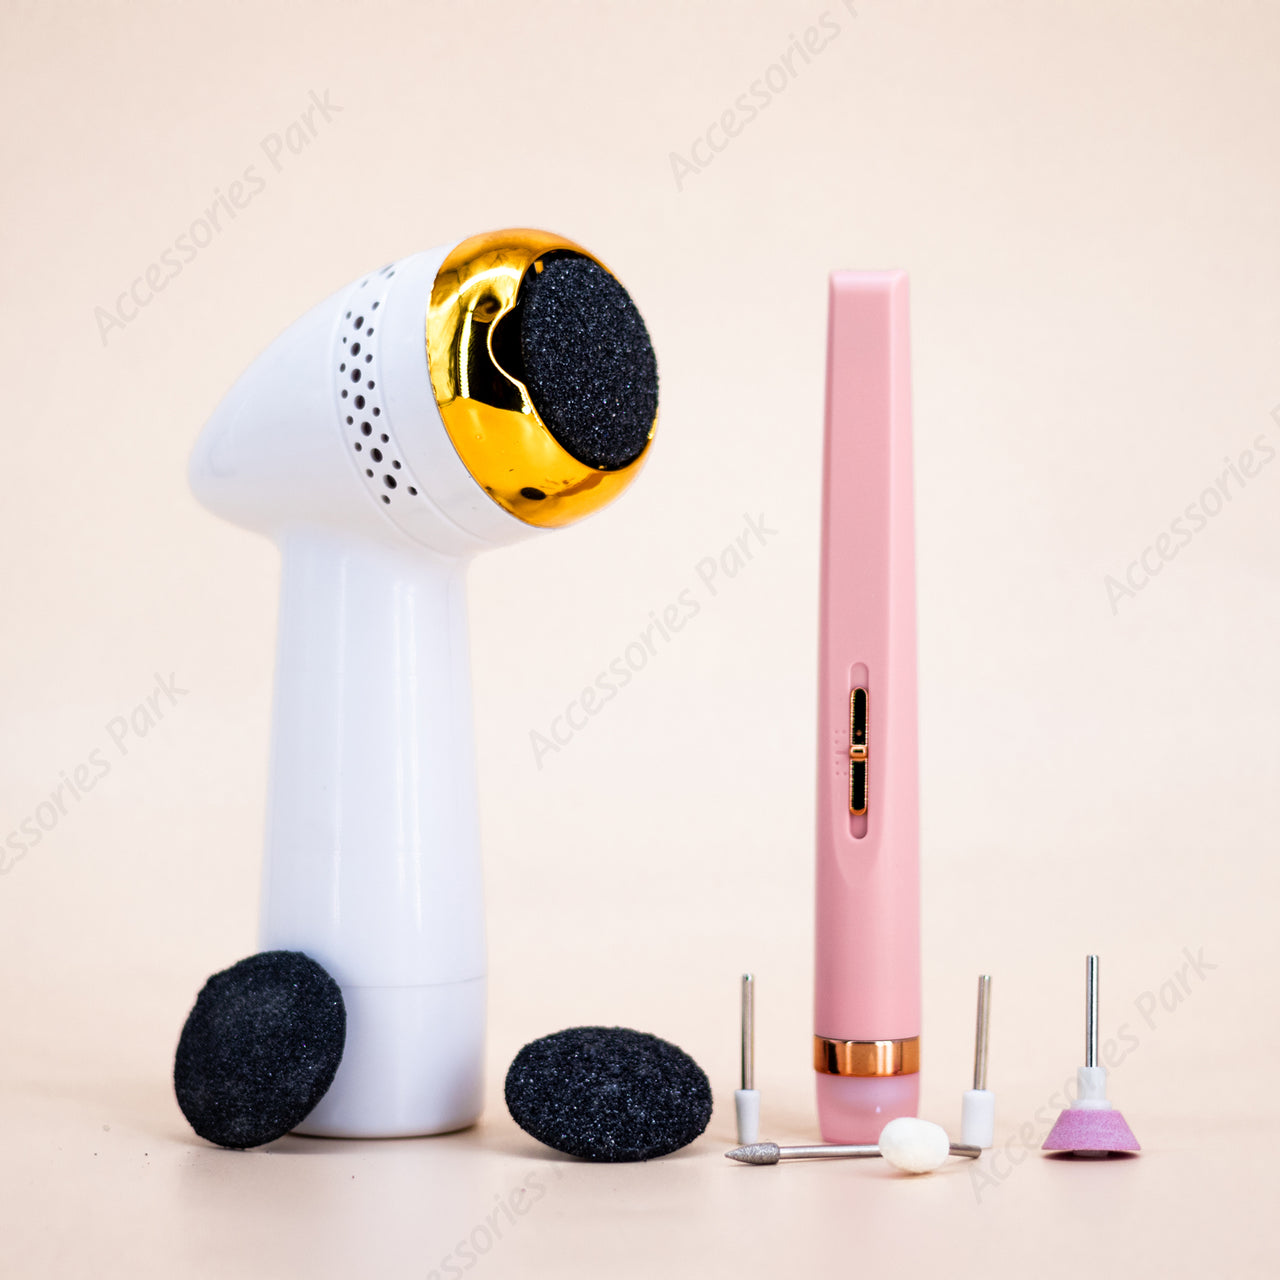 A picture of pedicure and manicure device. Pink color manicure device and white color foot filer device